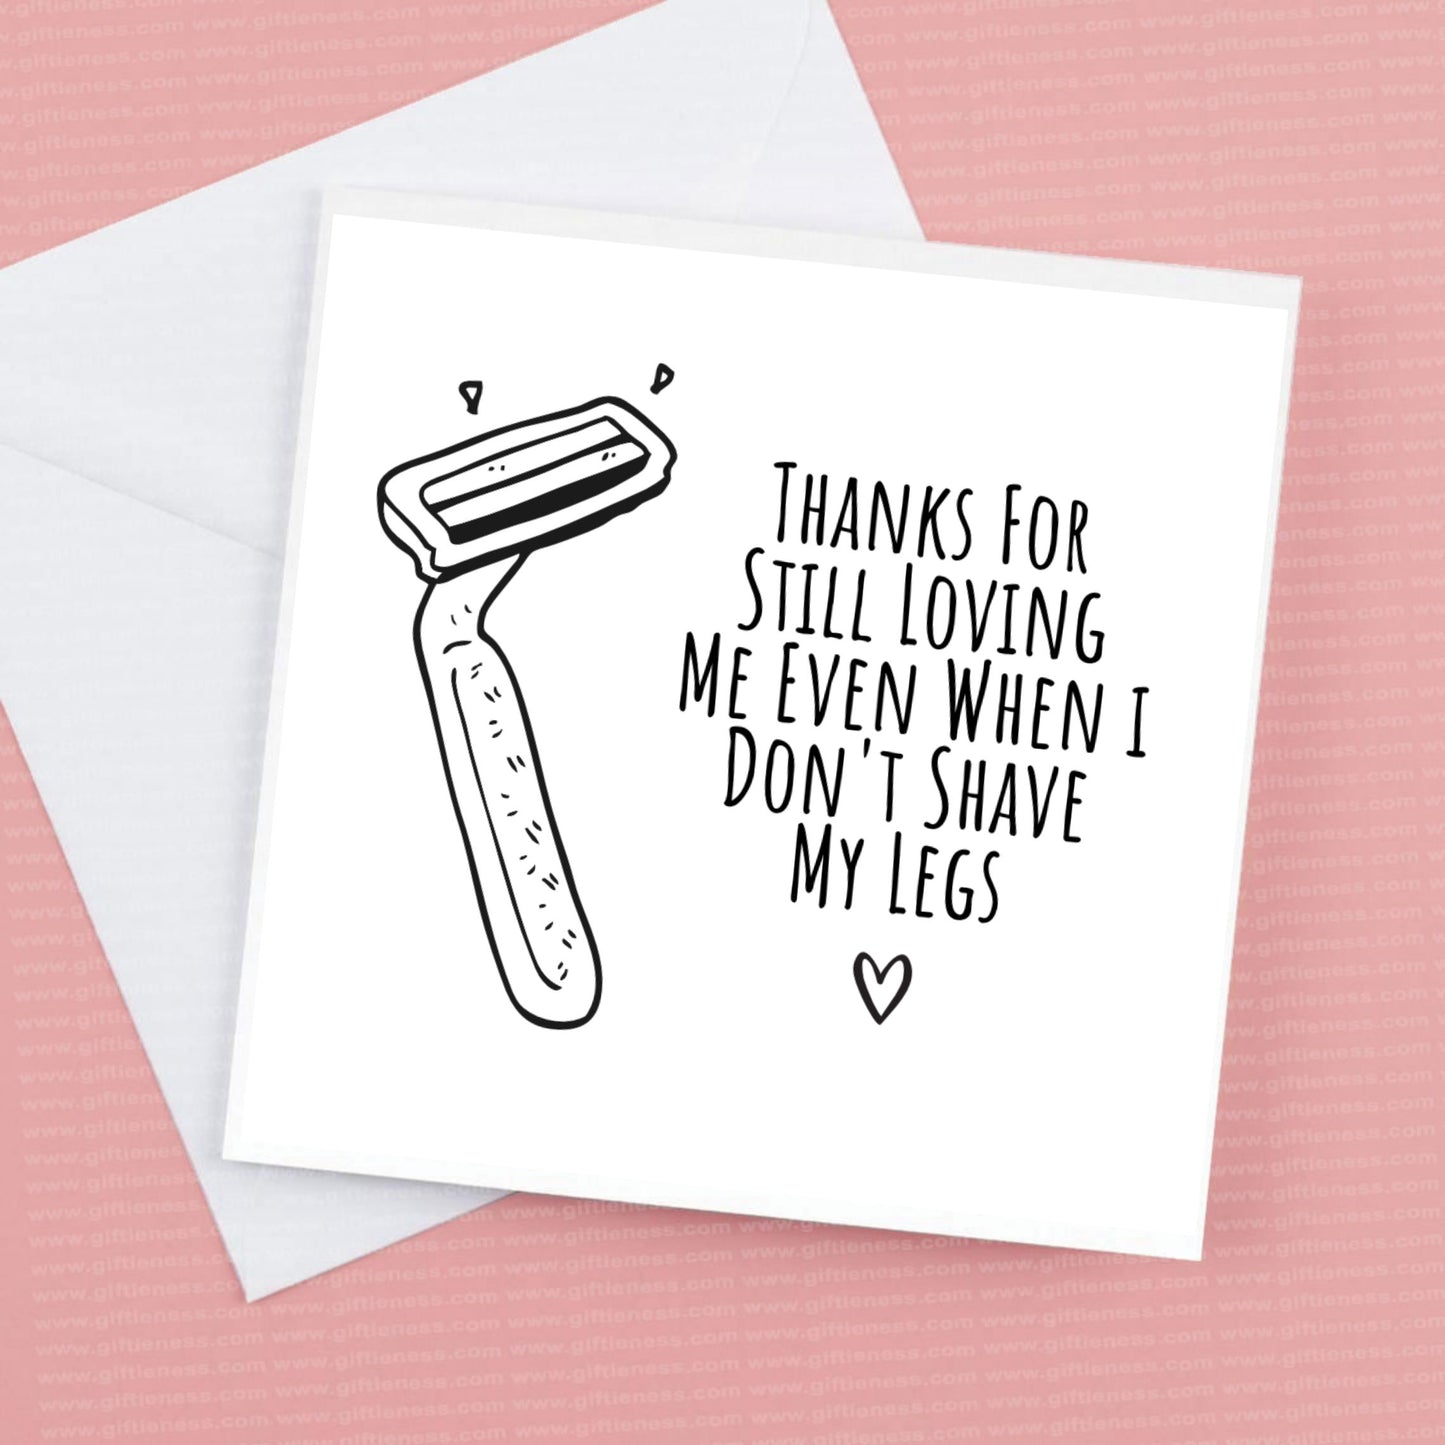 Valentines Card Thanks for still loving me even when I don't shave my legs